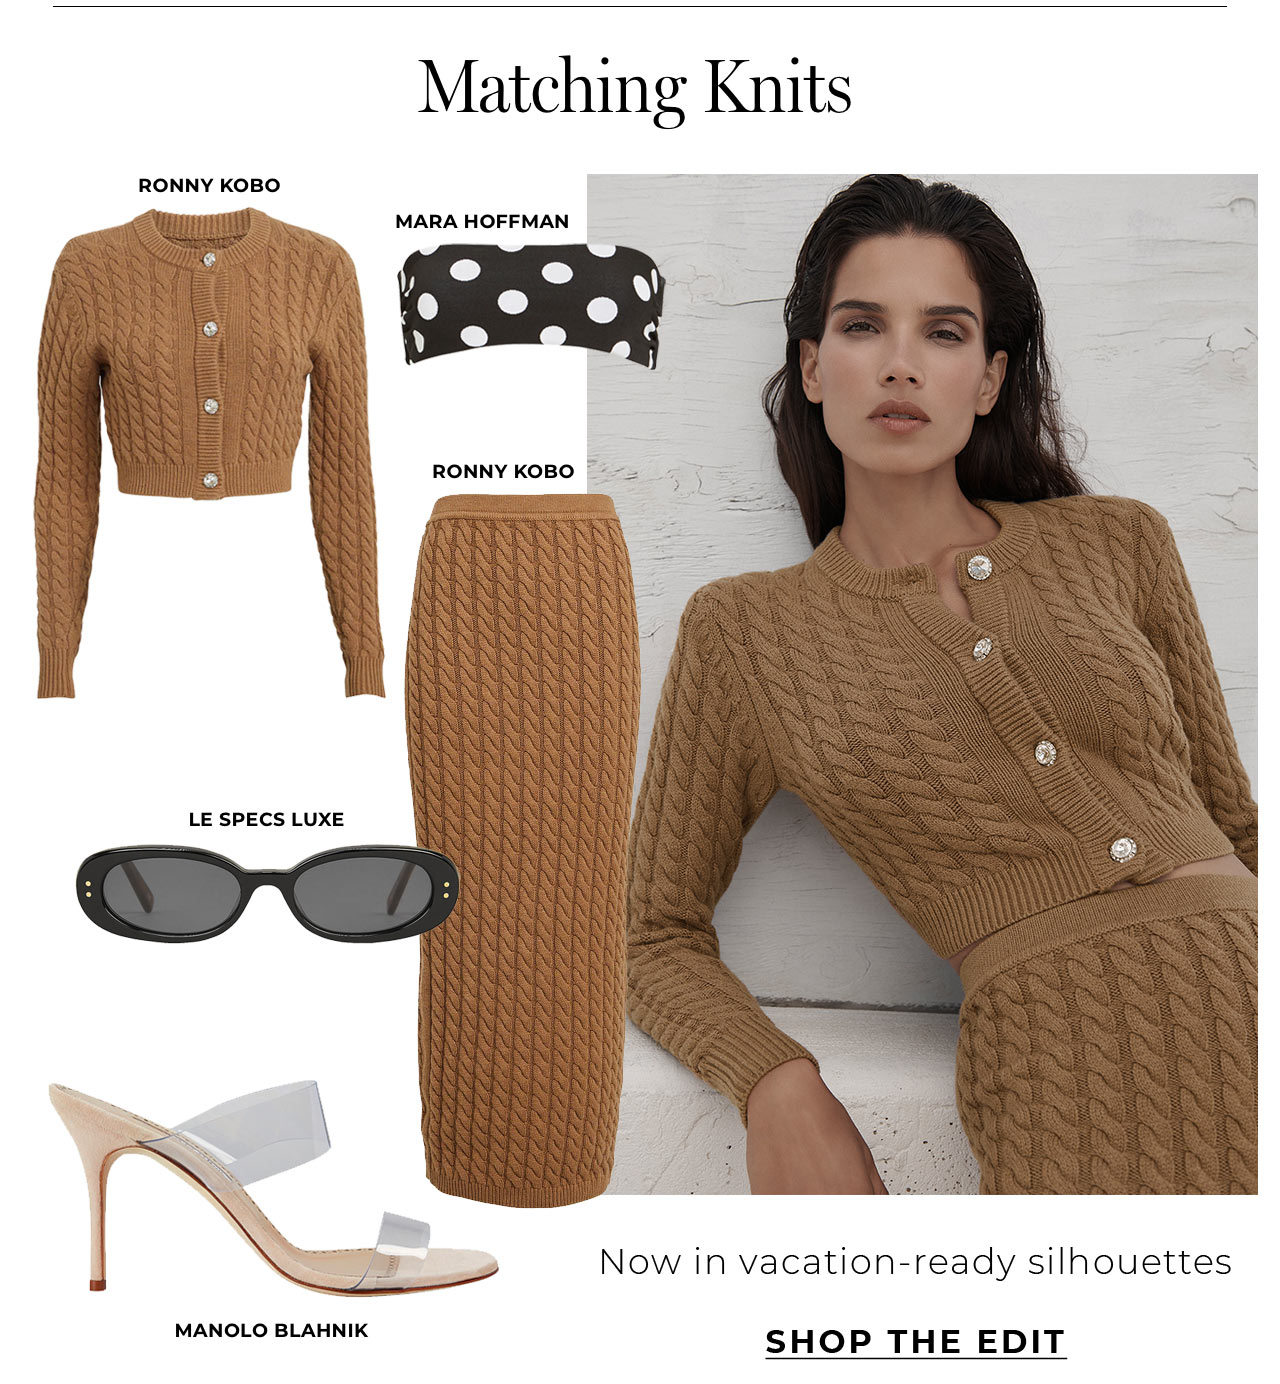 Matching knits are now in vacation-ready silhouttes